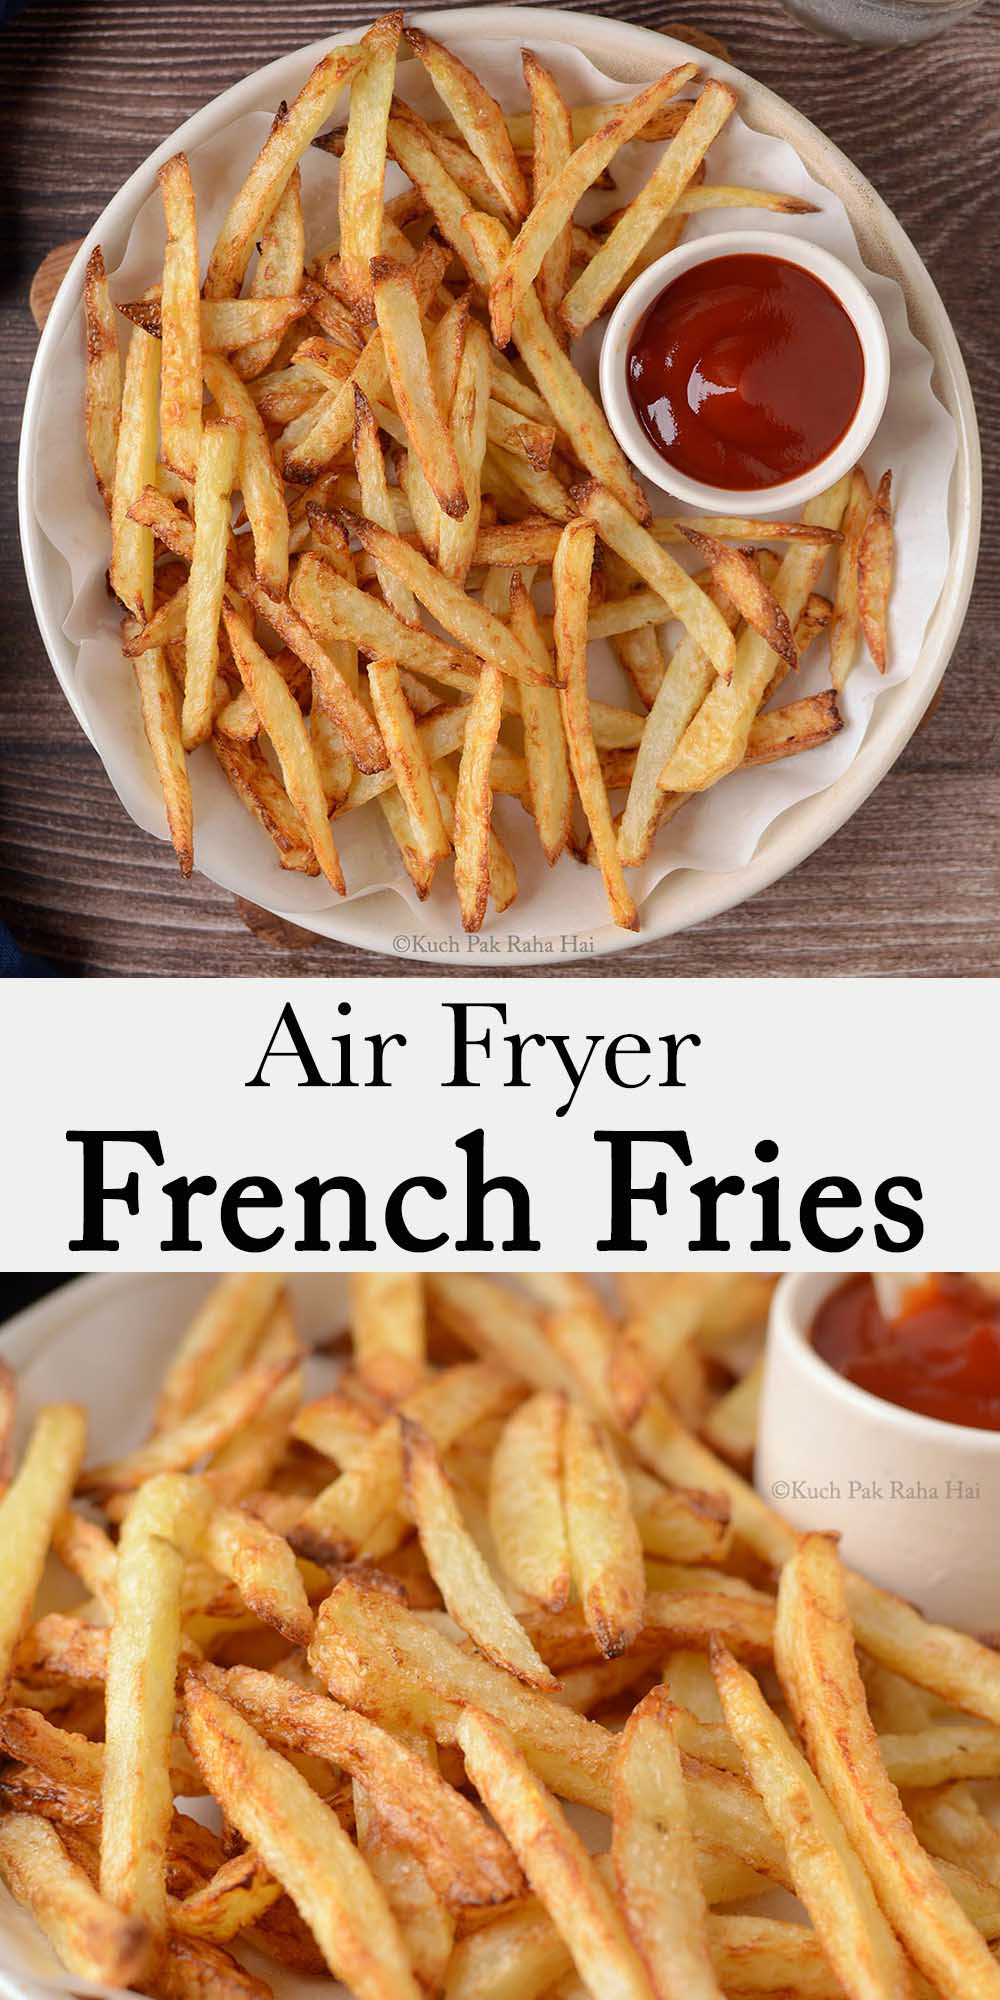 Air fryer french fries homemade crispy from scratch.